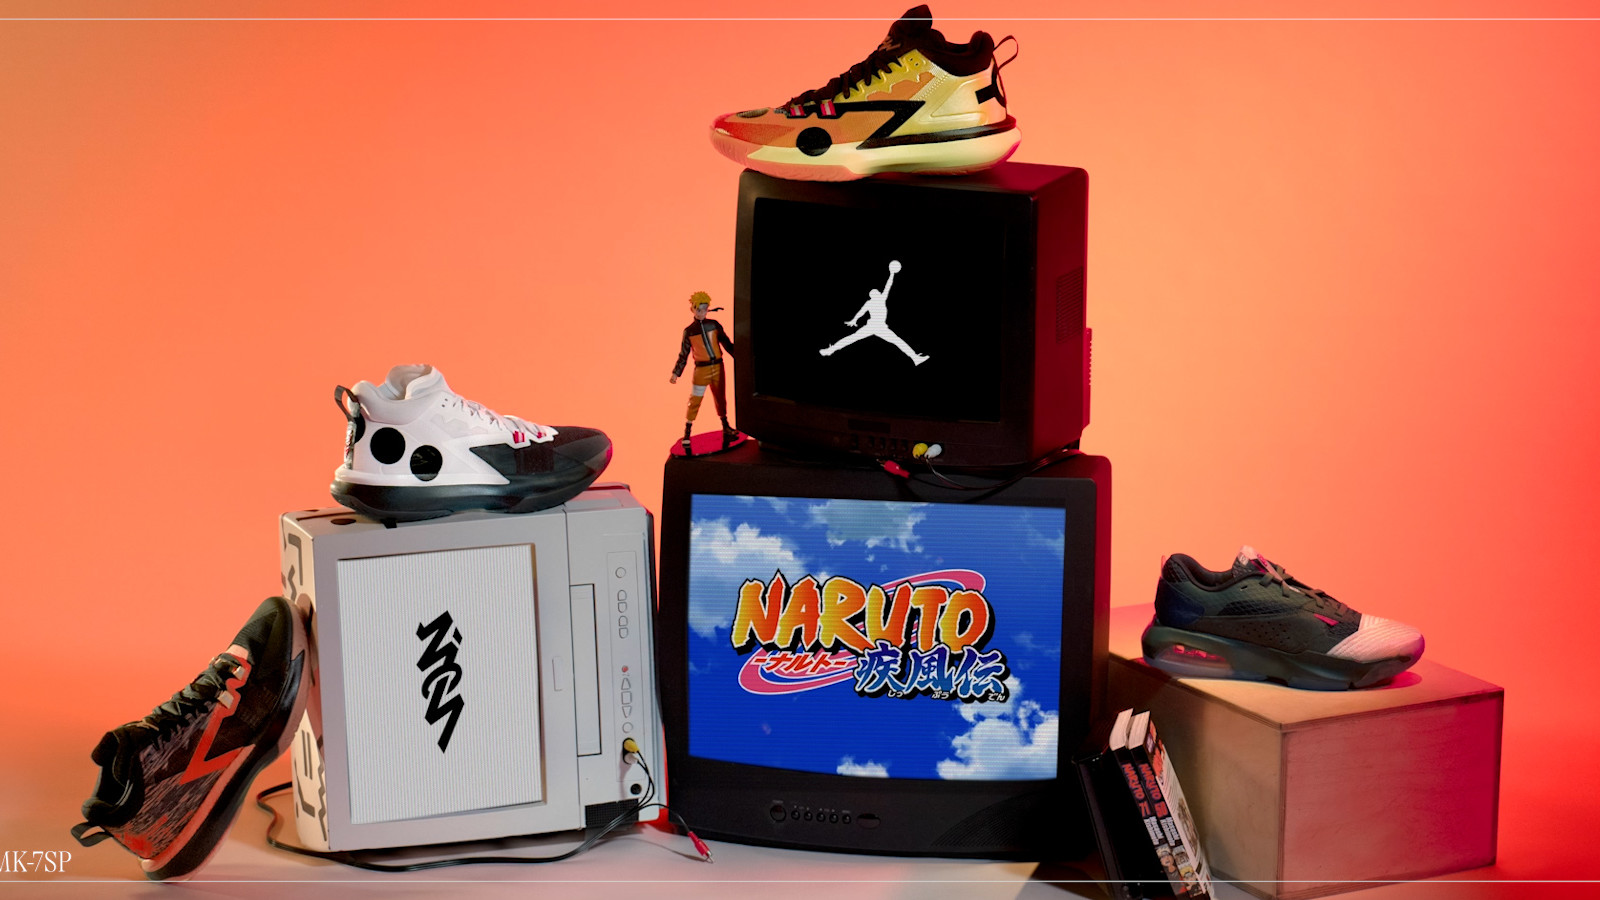 Jordan Zion 1 Naruto Anime Collaboration Release Date May 2022 | Sole Collector